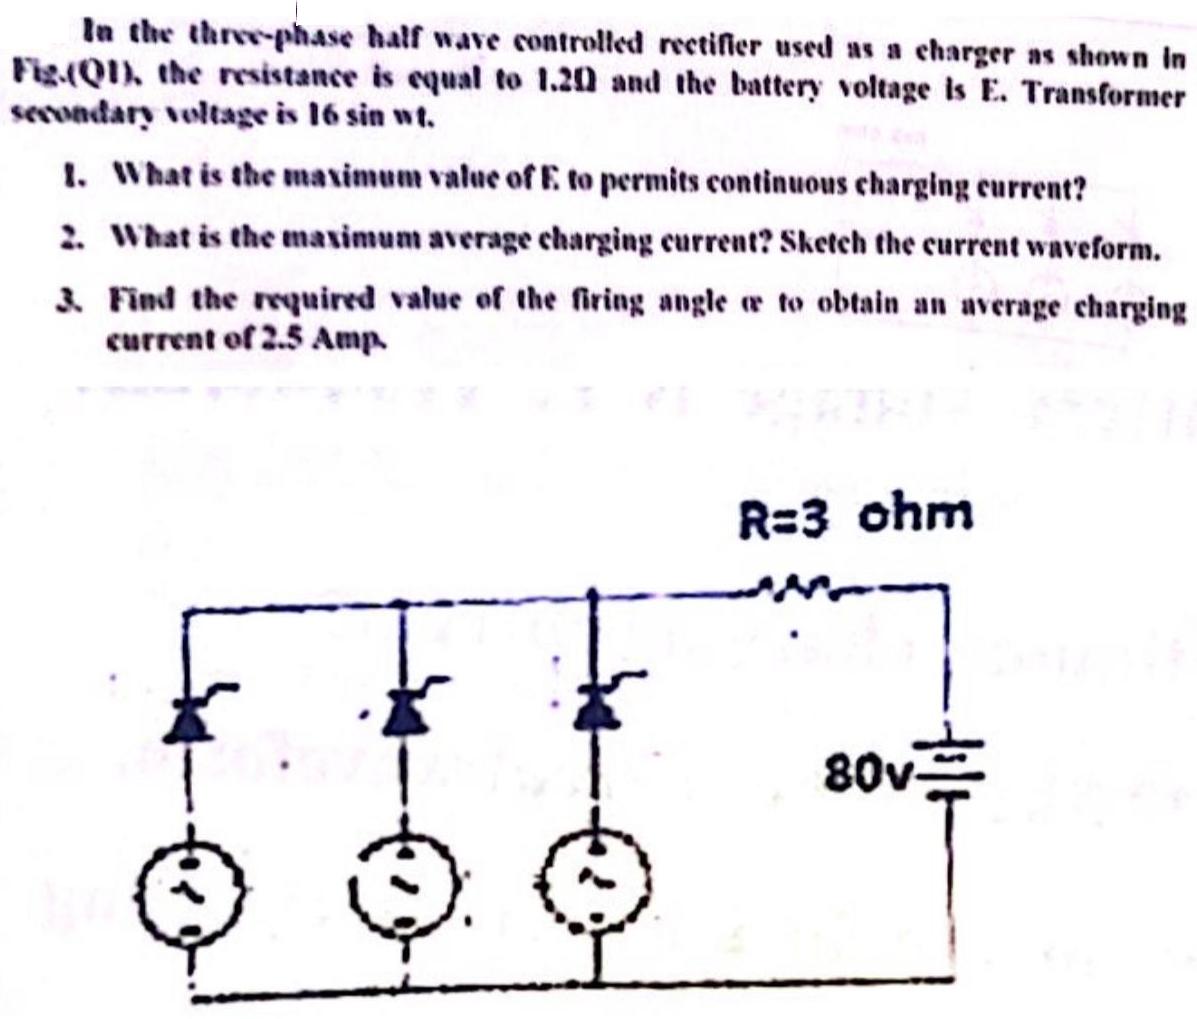 In the three-phase half wave controlled rectifier used as a charger as shown in Fig.(Q1), the resistance is